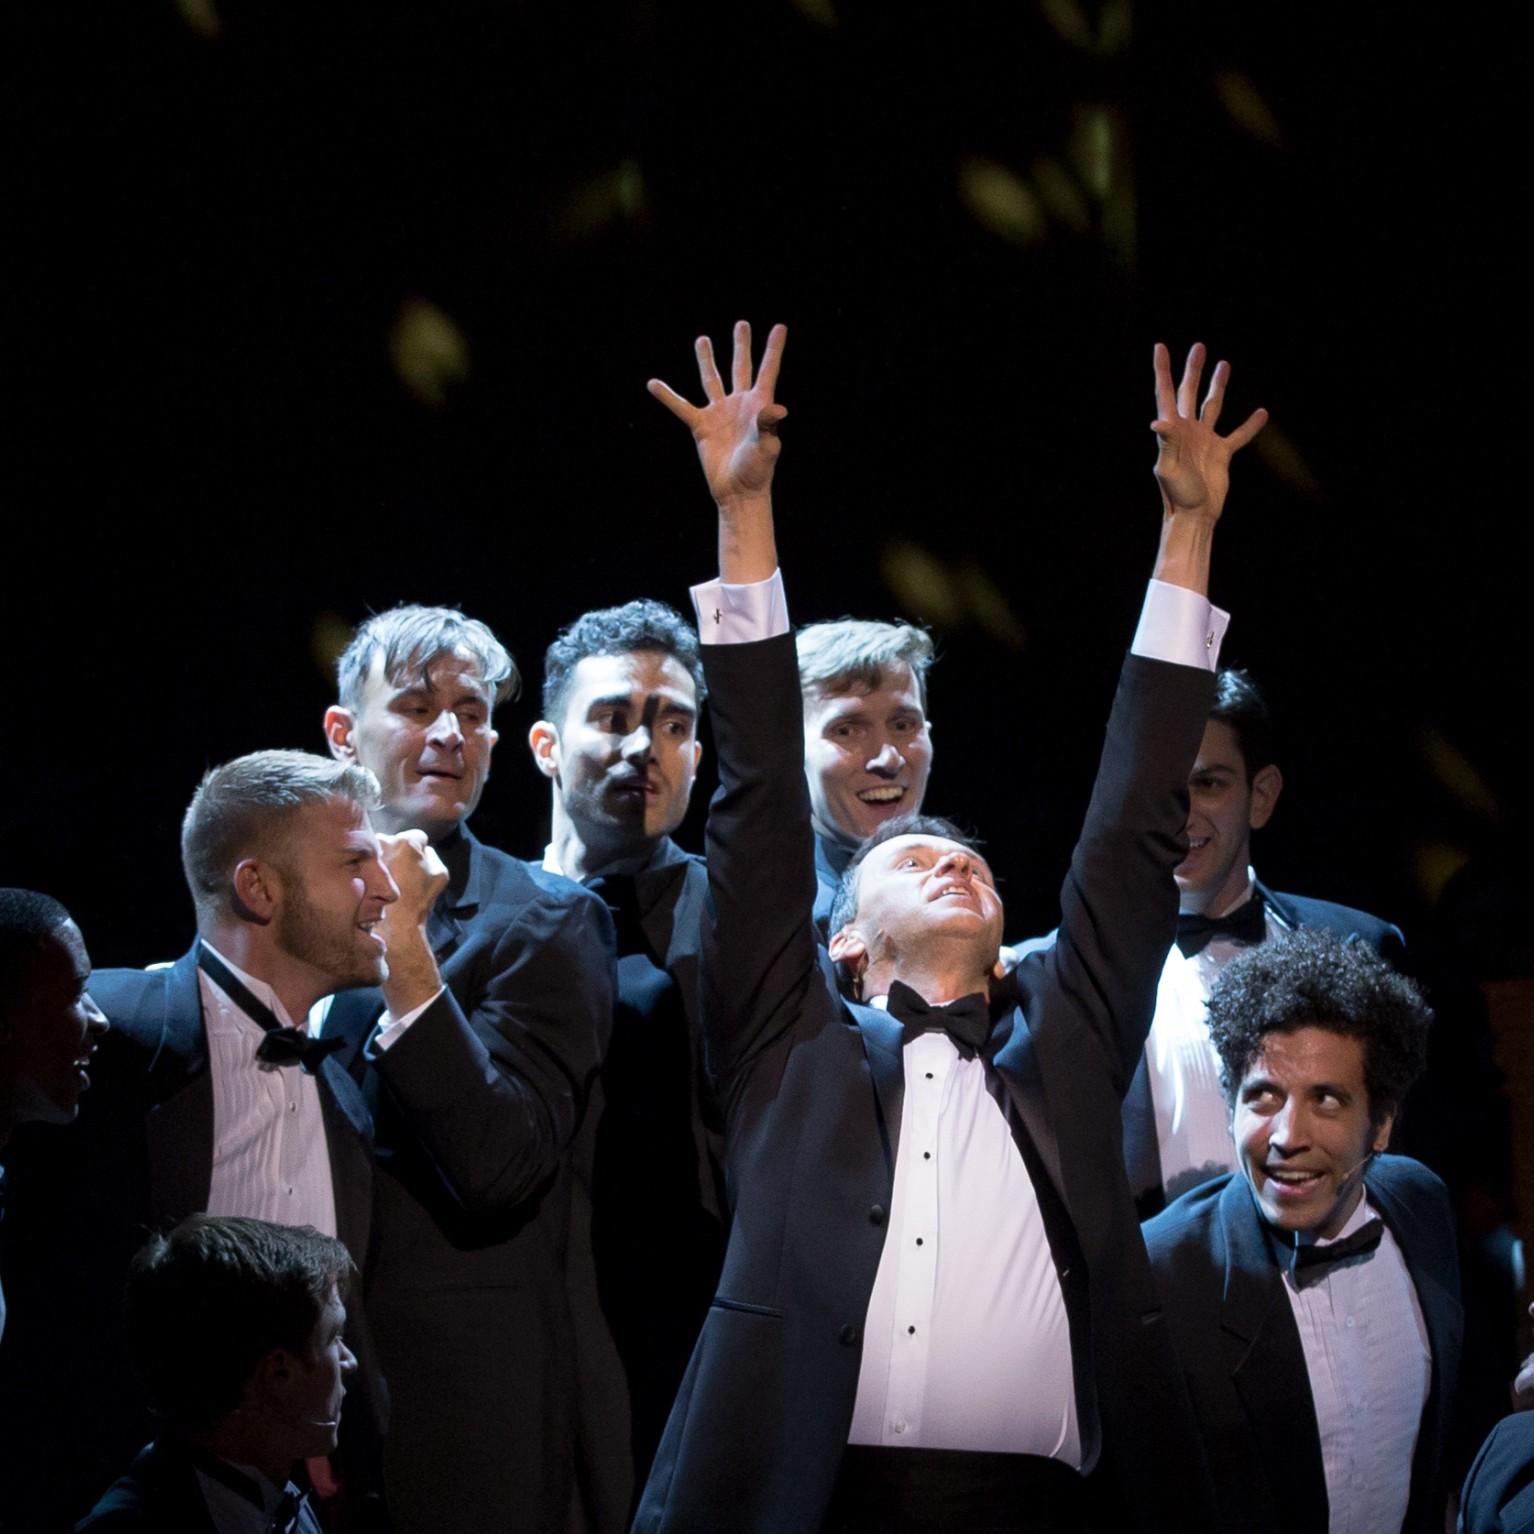 Men in black tuxedos rejoicing on stage around a man with hands raised up high